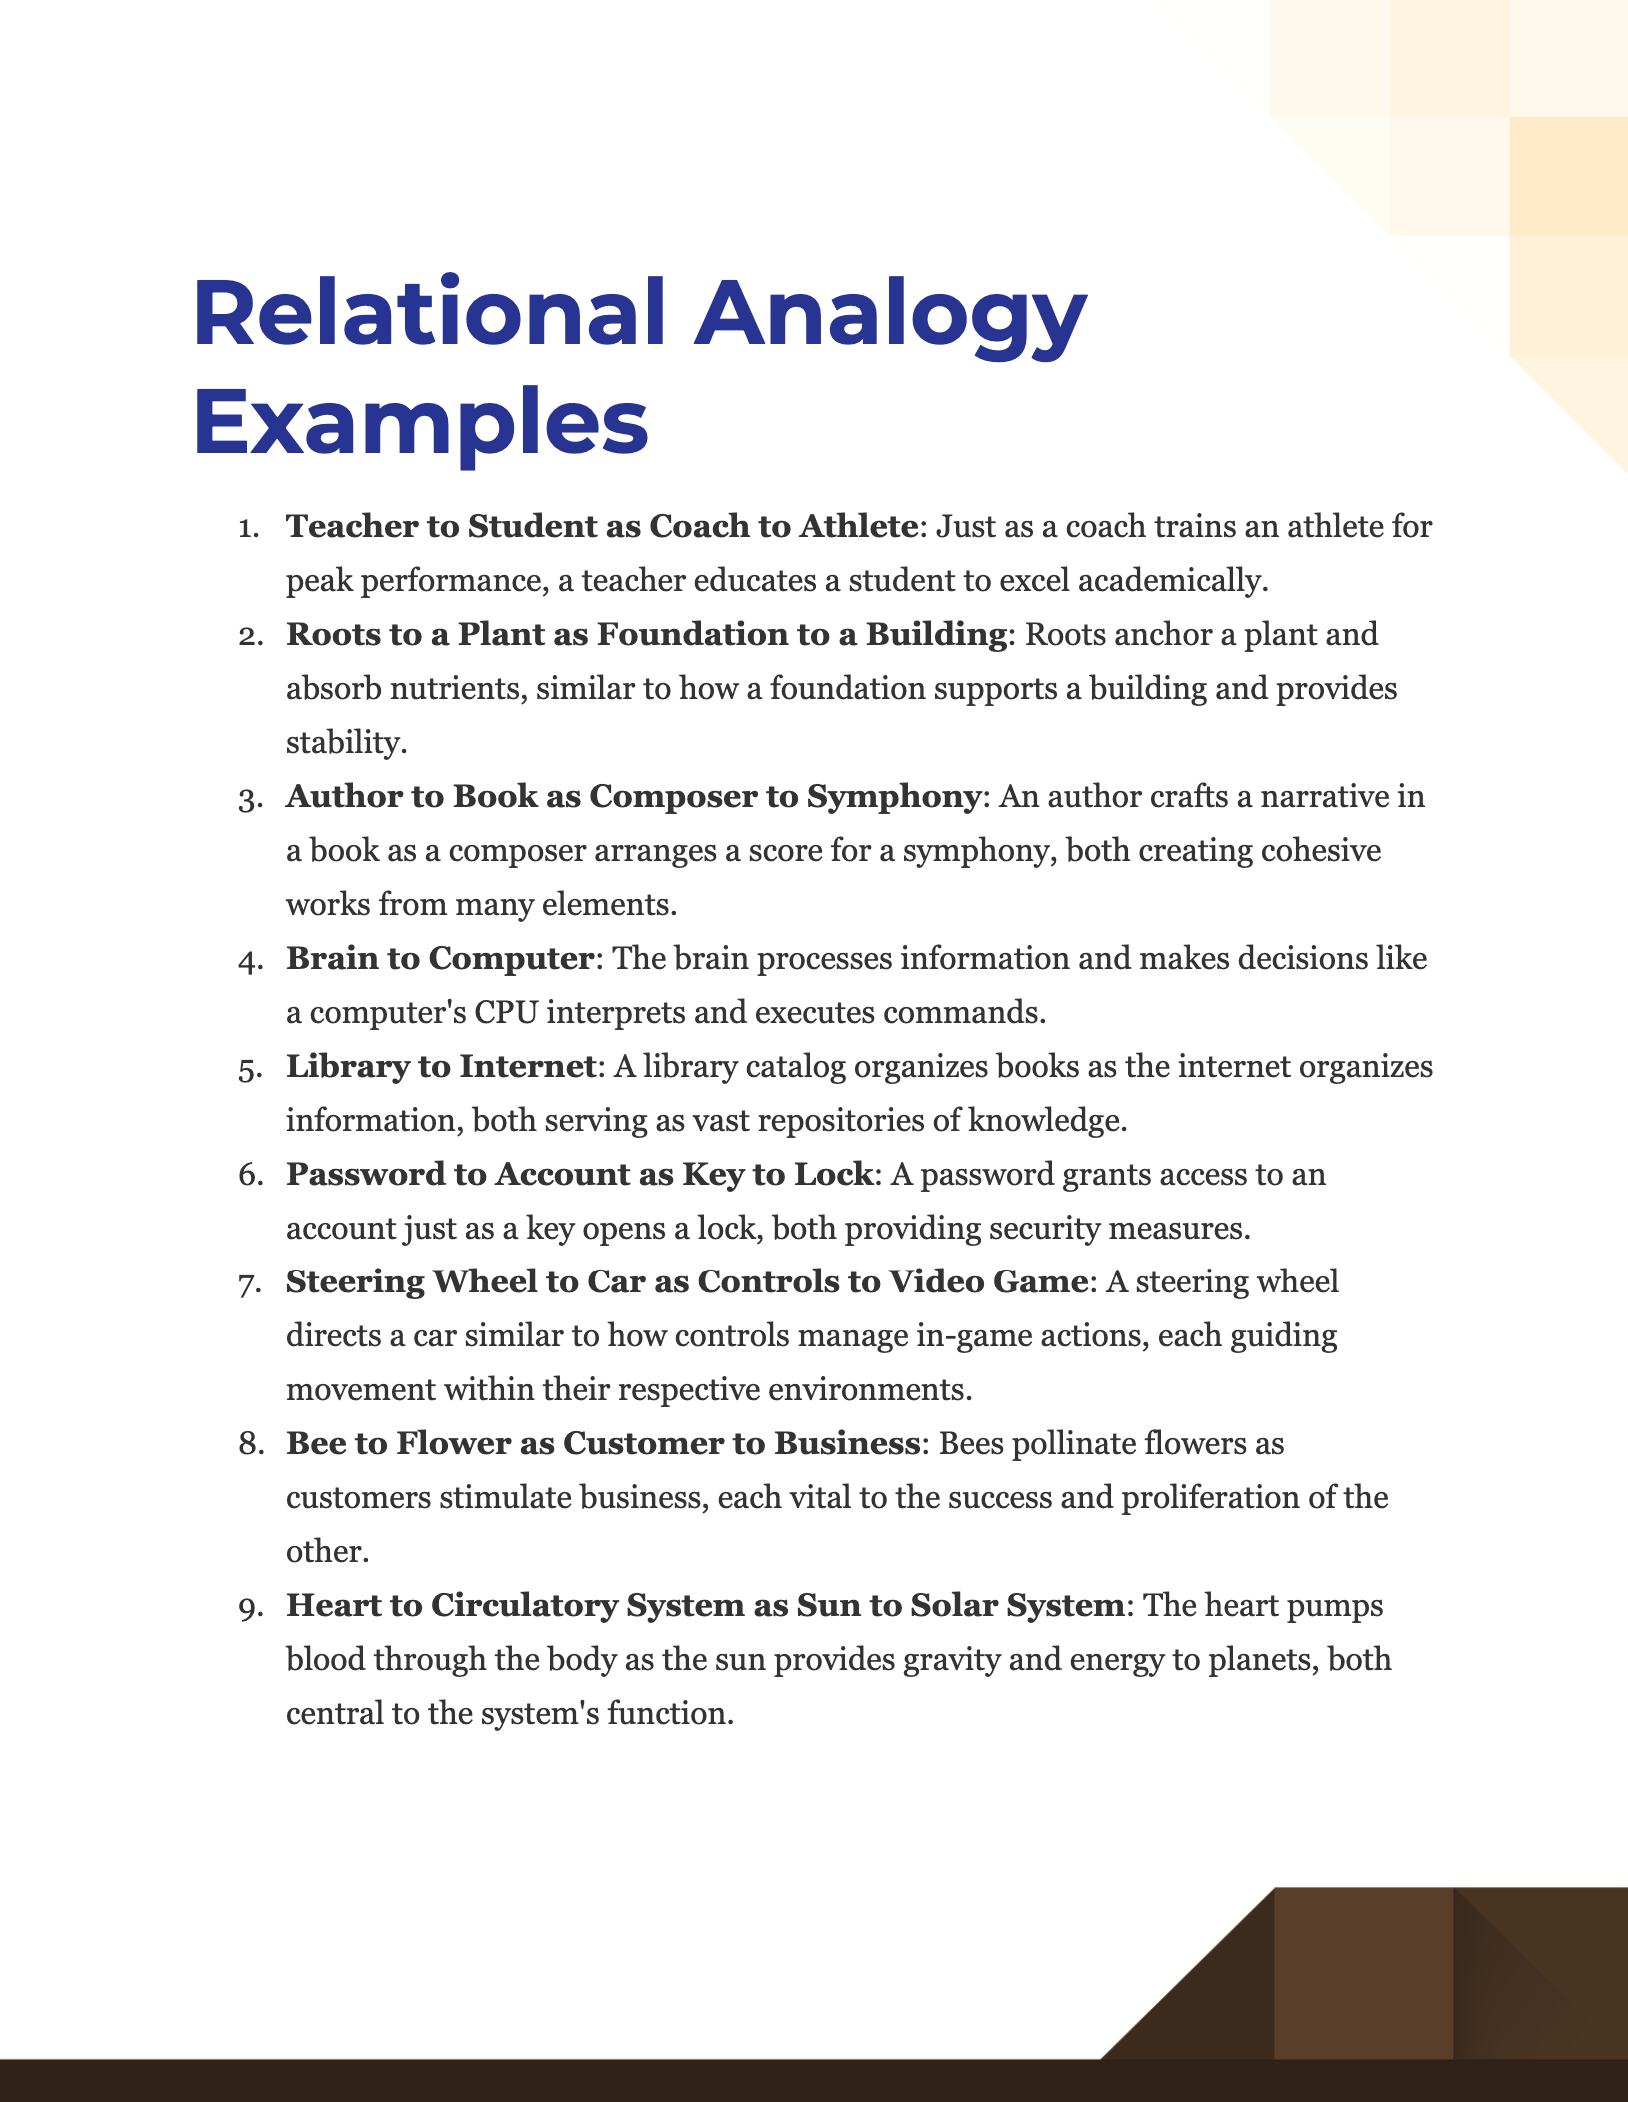 Relational Analogy Examples